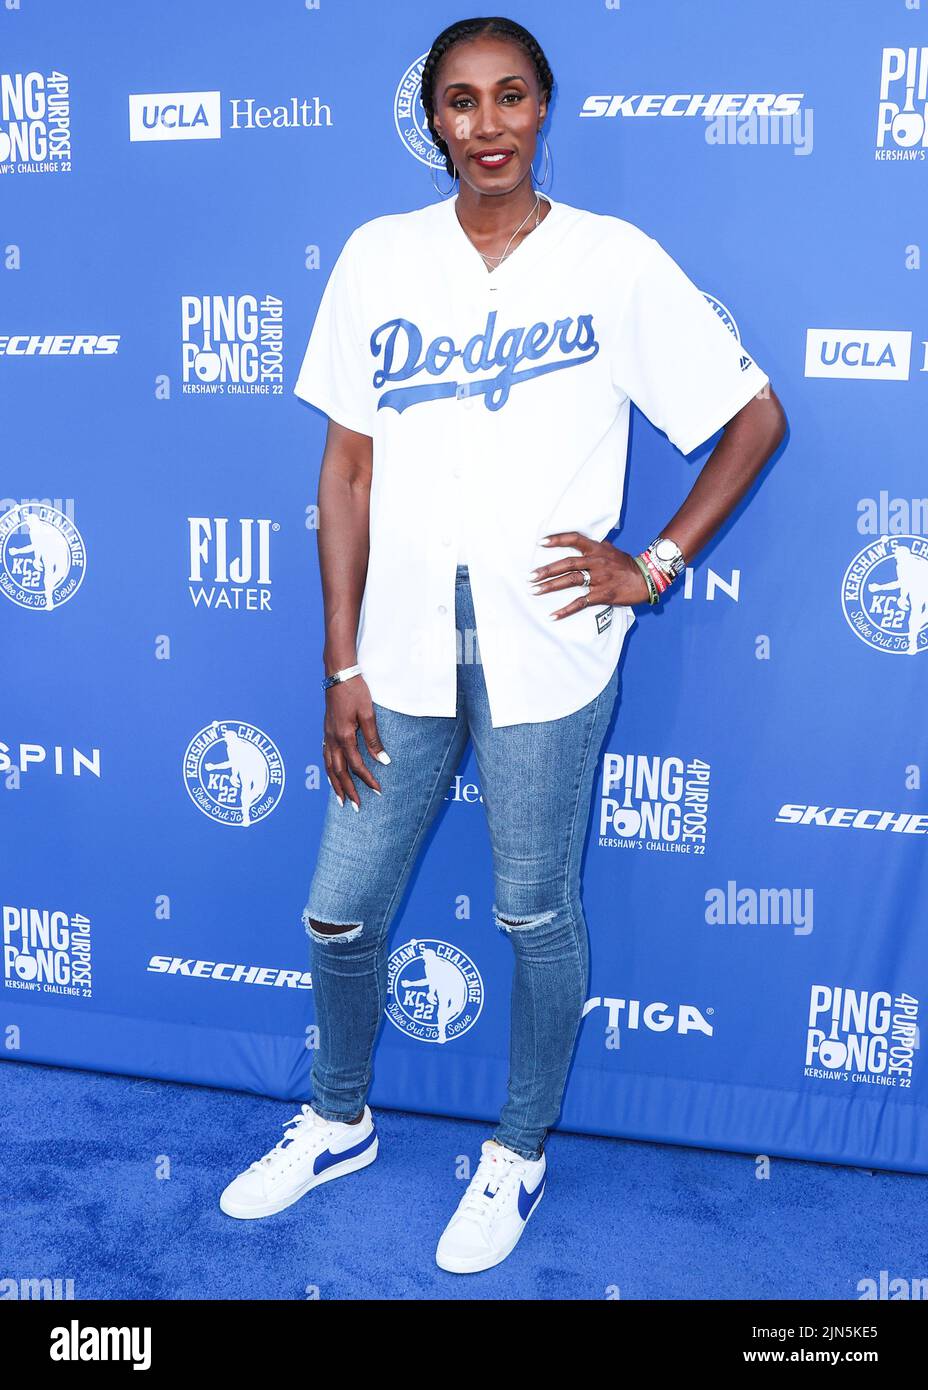 ELYSIAN PARK, LOS ANGELES, CALIFORNIA, USA - AUGUST 08: American former professional basketball player Lisa Leslie arrives at Kershaw's Challenge Ping Pong 4 Purpose 2022 held at Dodger Stadium on August 8, 2022 in Elysian Park, Los Angeles, California, United States. (Photo by Xavier Collin/Image Press Agency) Stock Photo